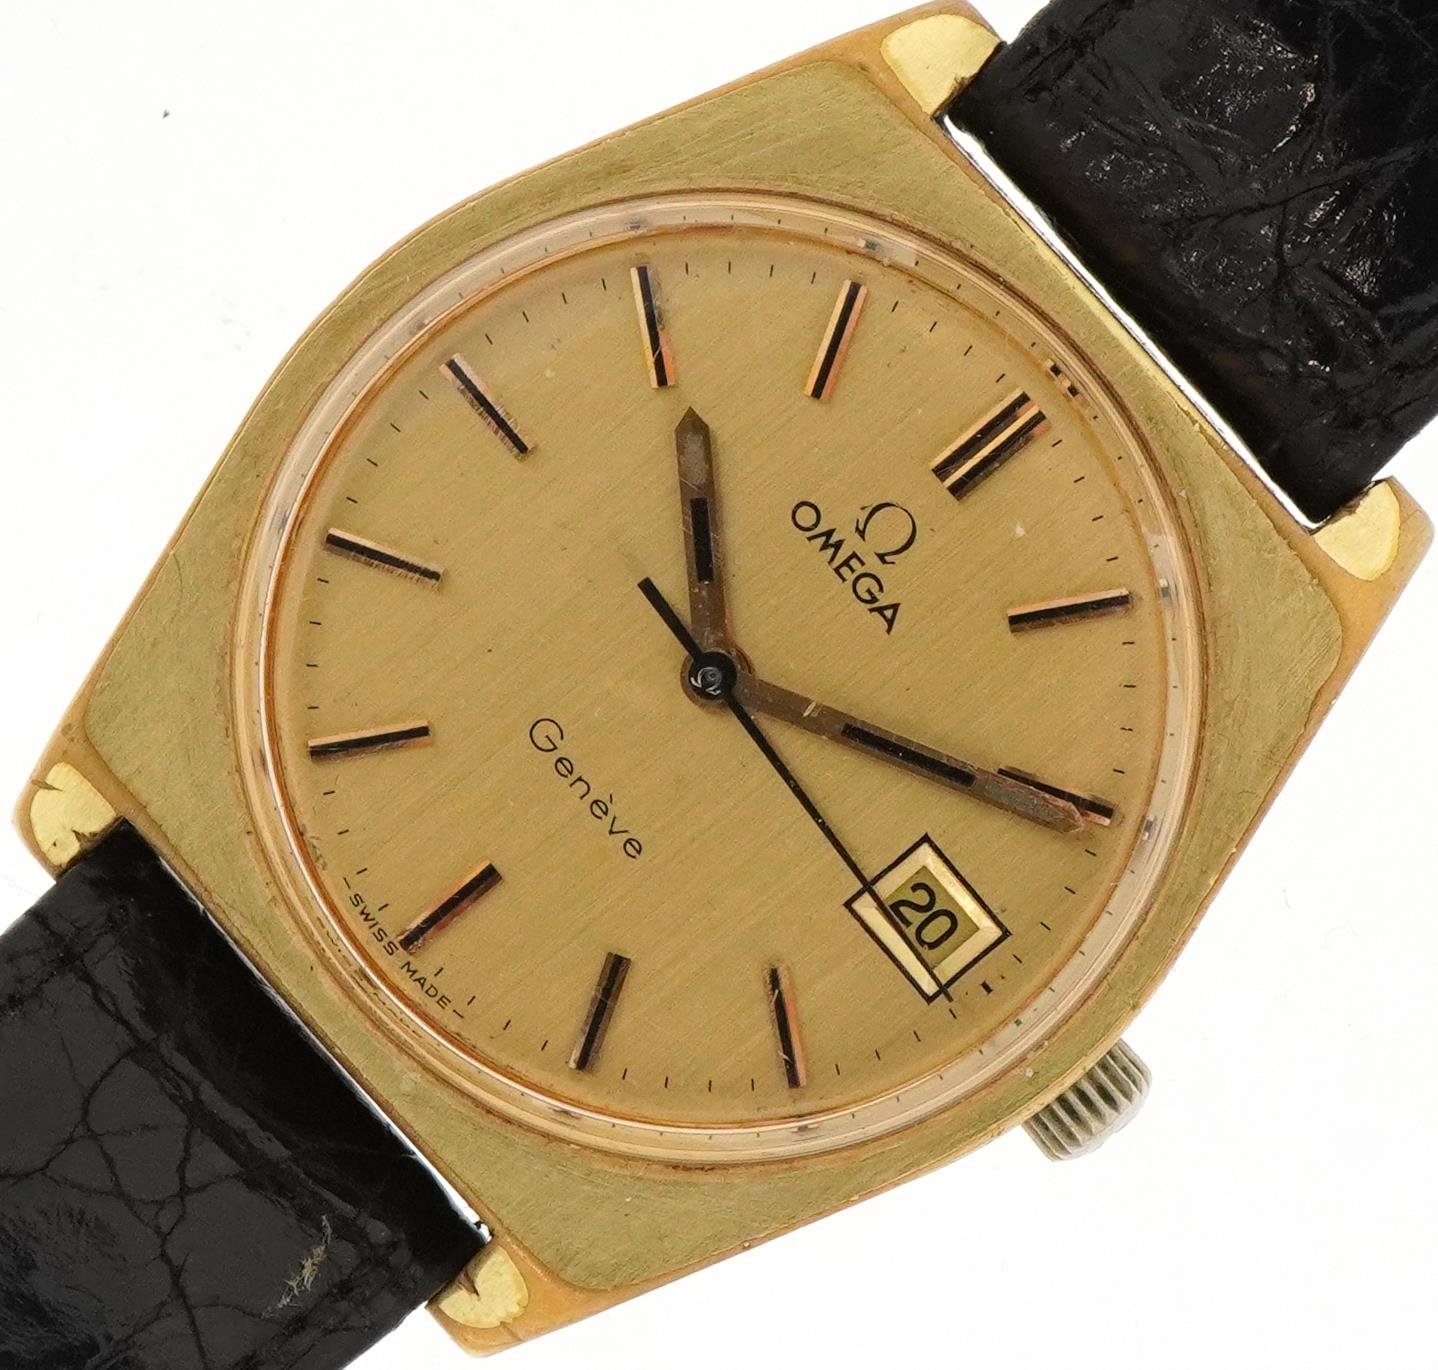 Omega, gentlemen's Omega manual wind wristwatch having gilt dial with date aperture, the movement